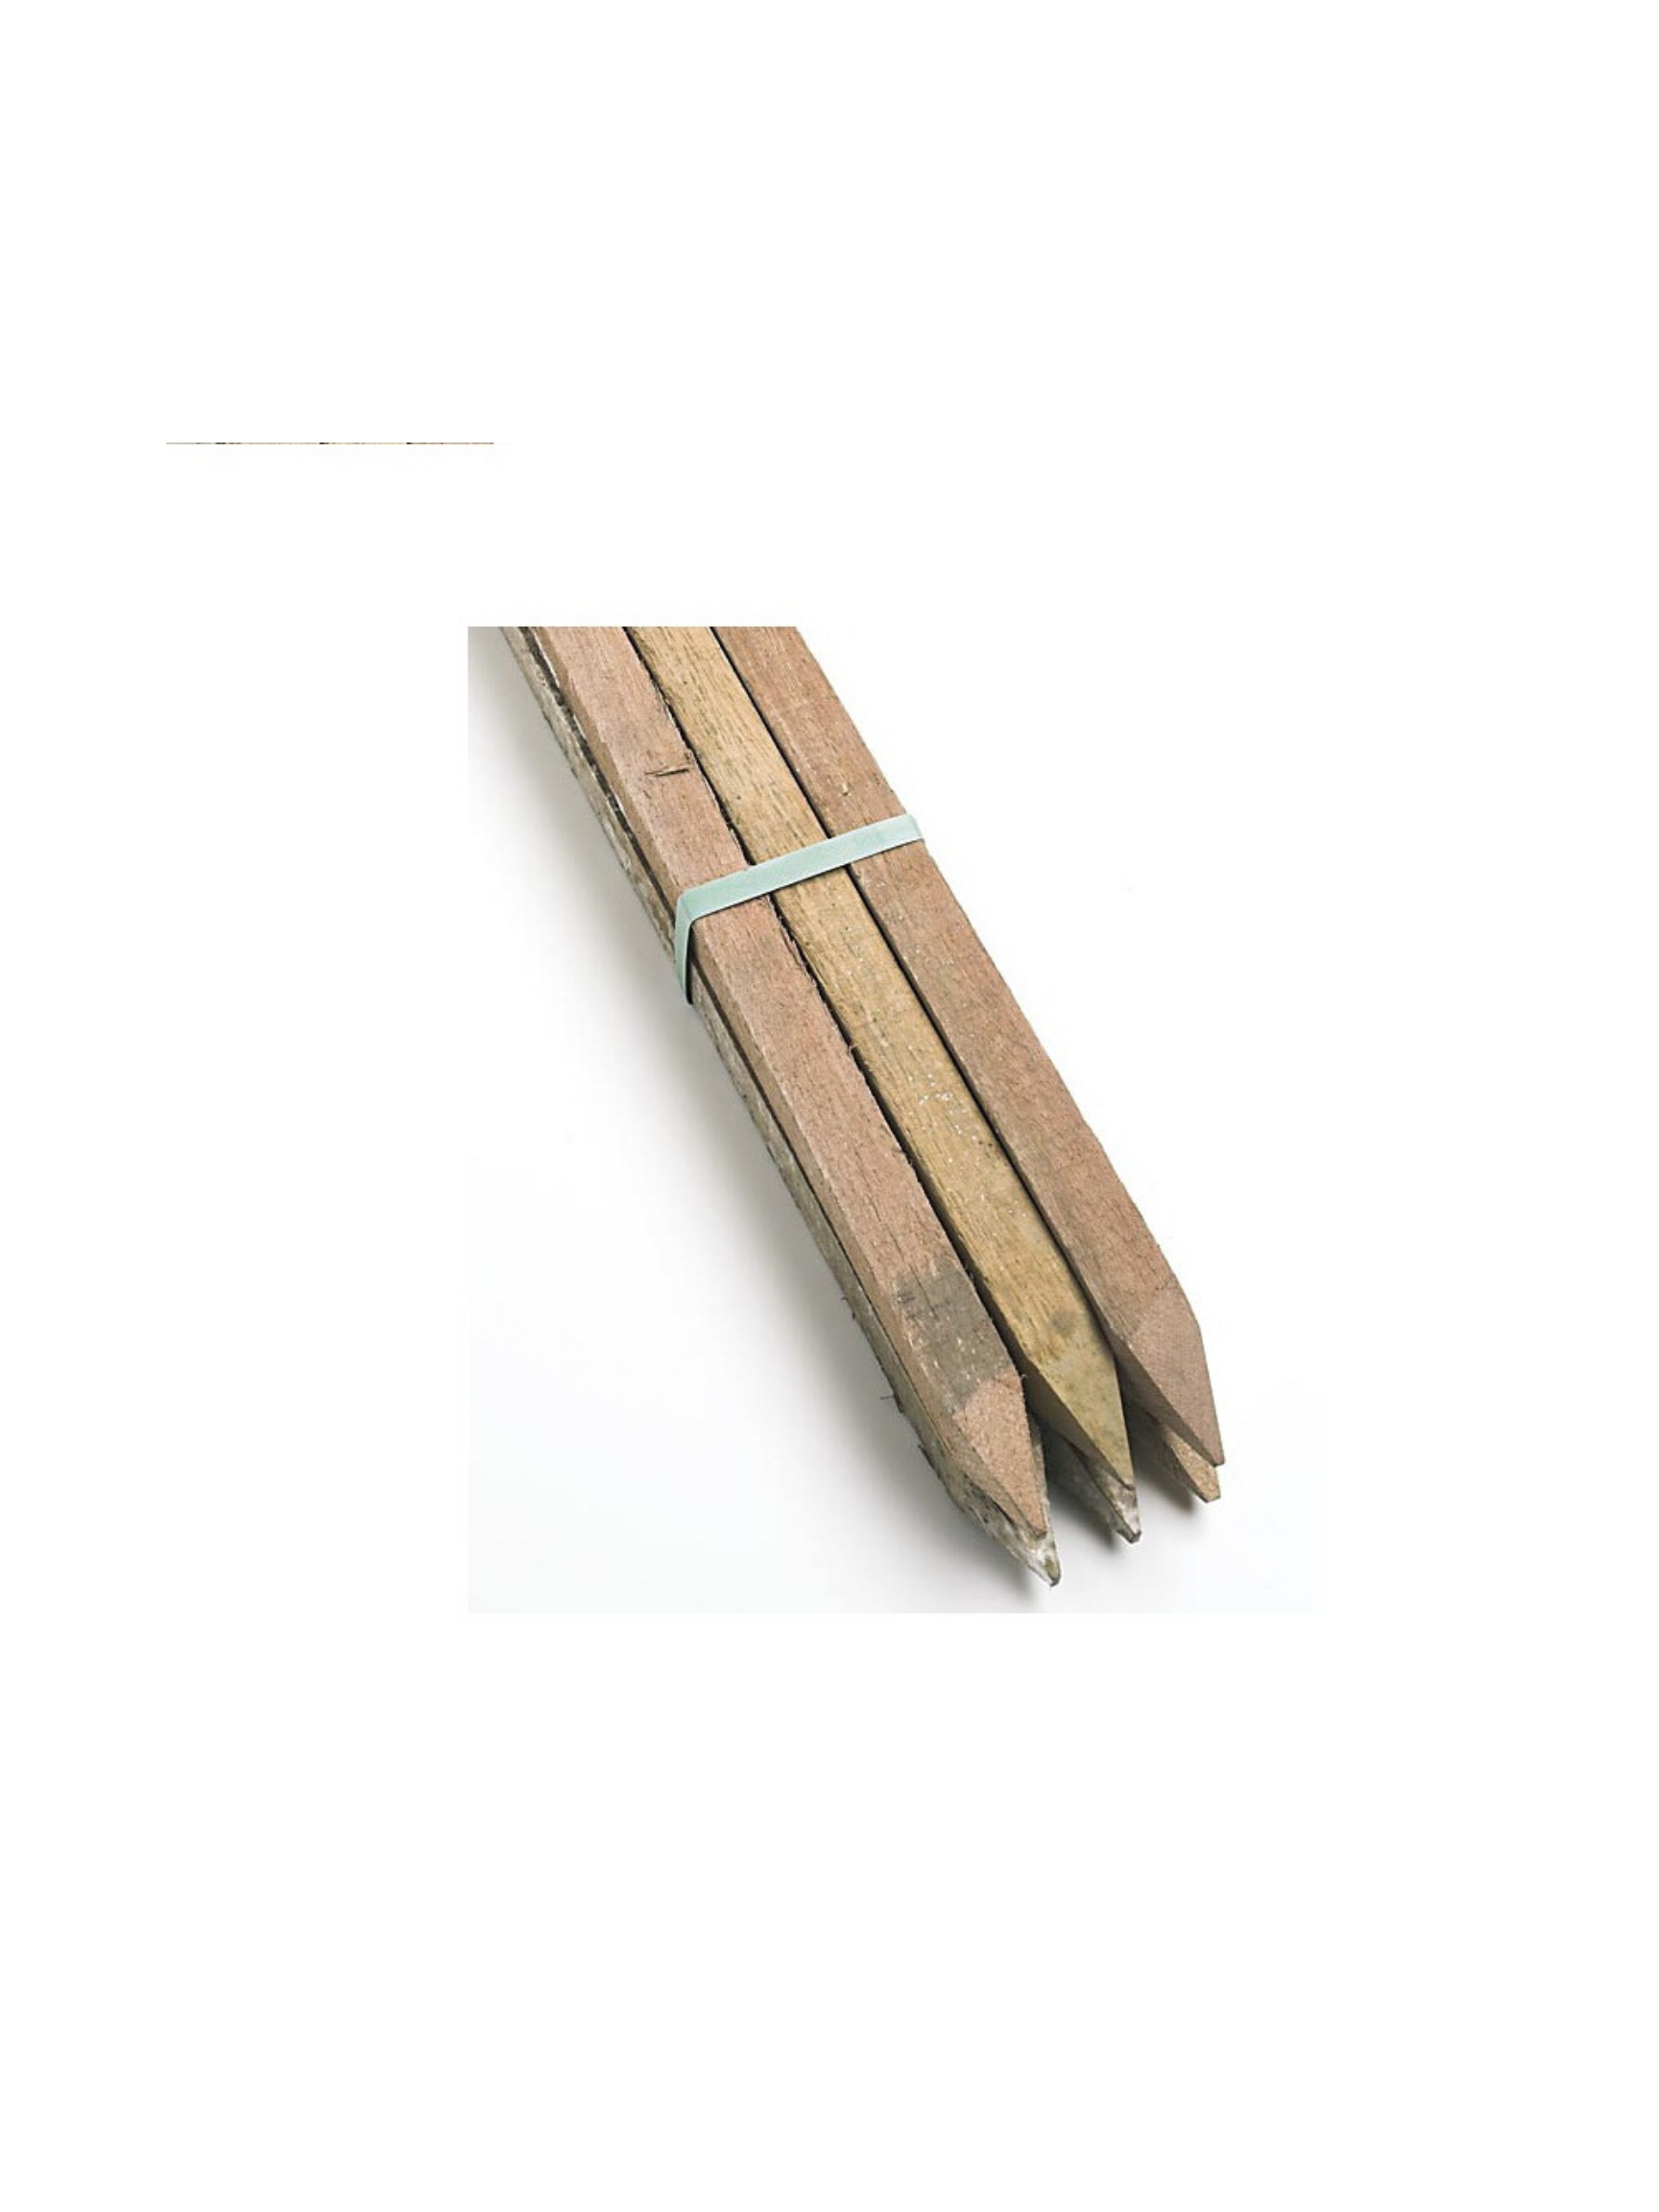 Timber Stakes 25 x 25 x 900mm (Per 10)